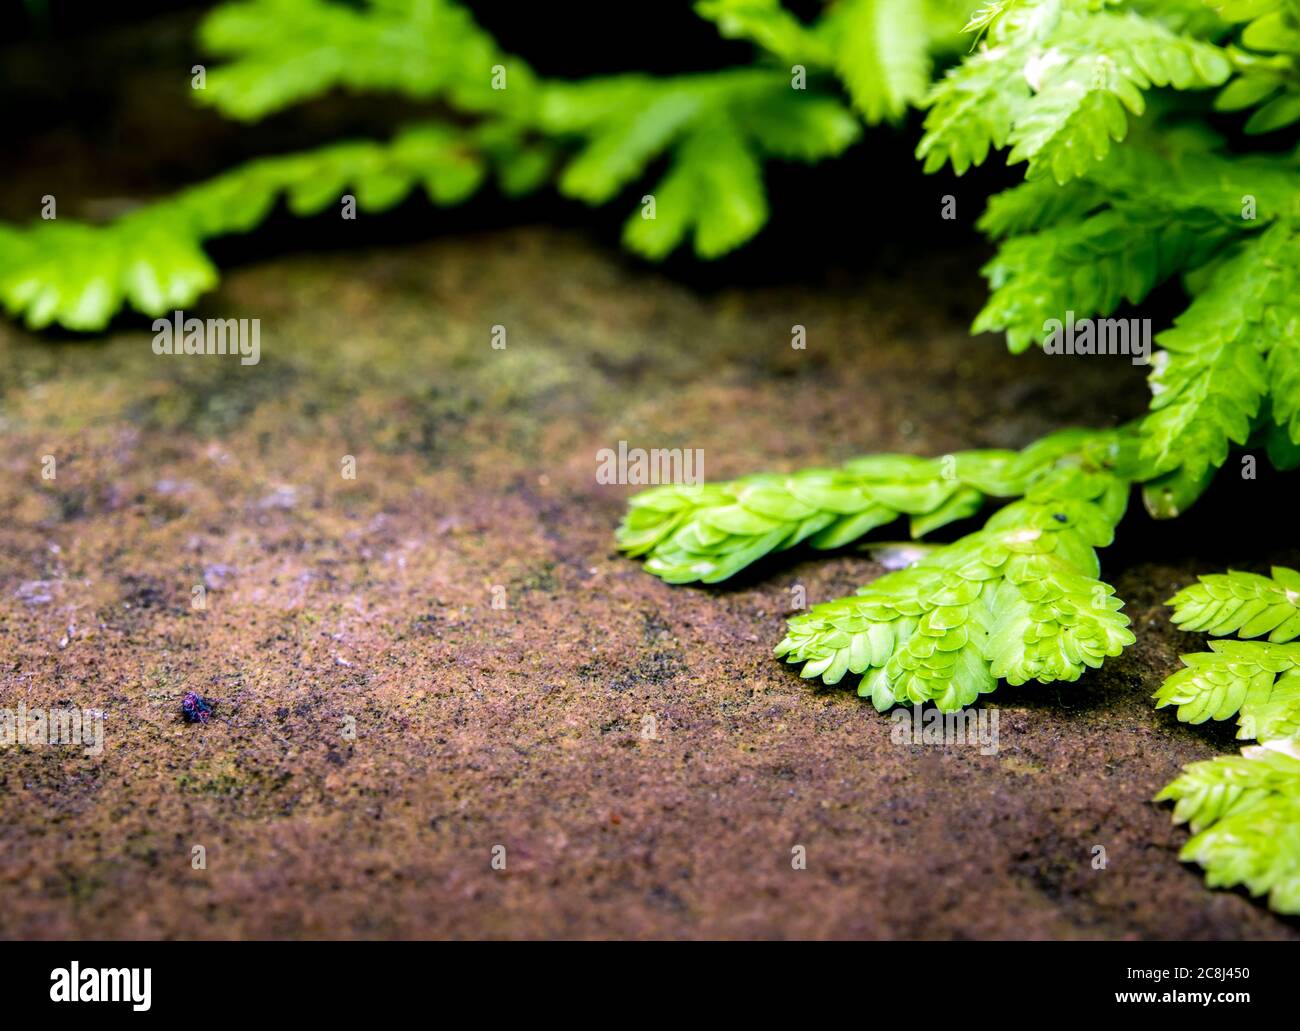 Freshness green and small leaf of peacock fern on river rock Stock Photo